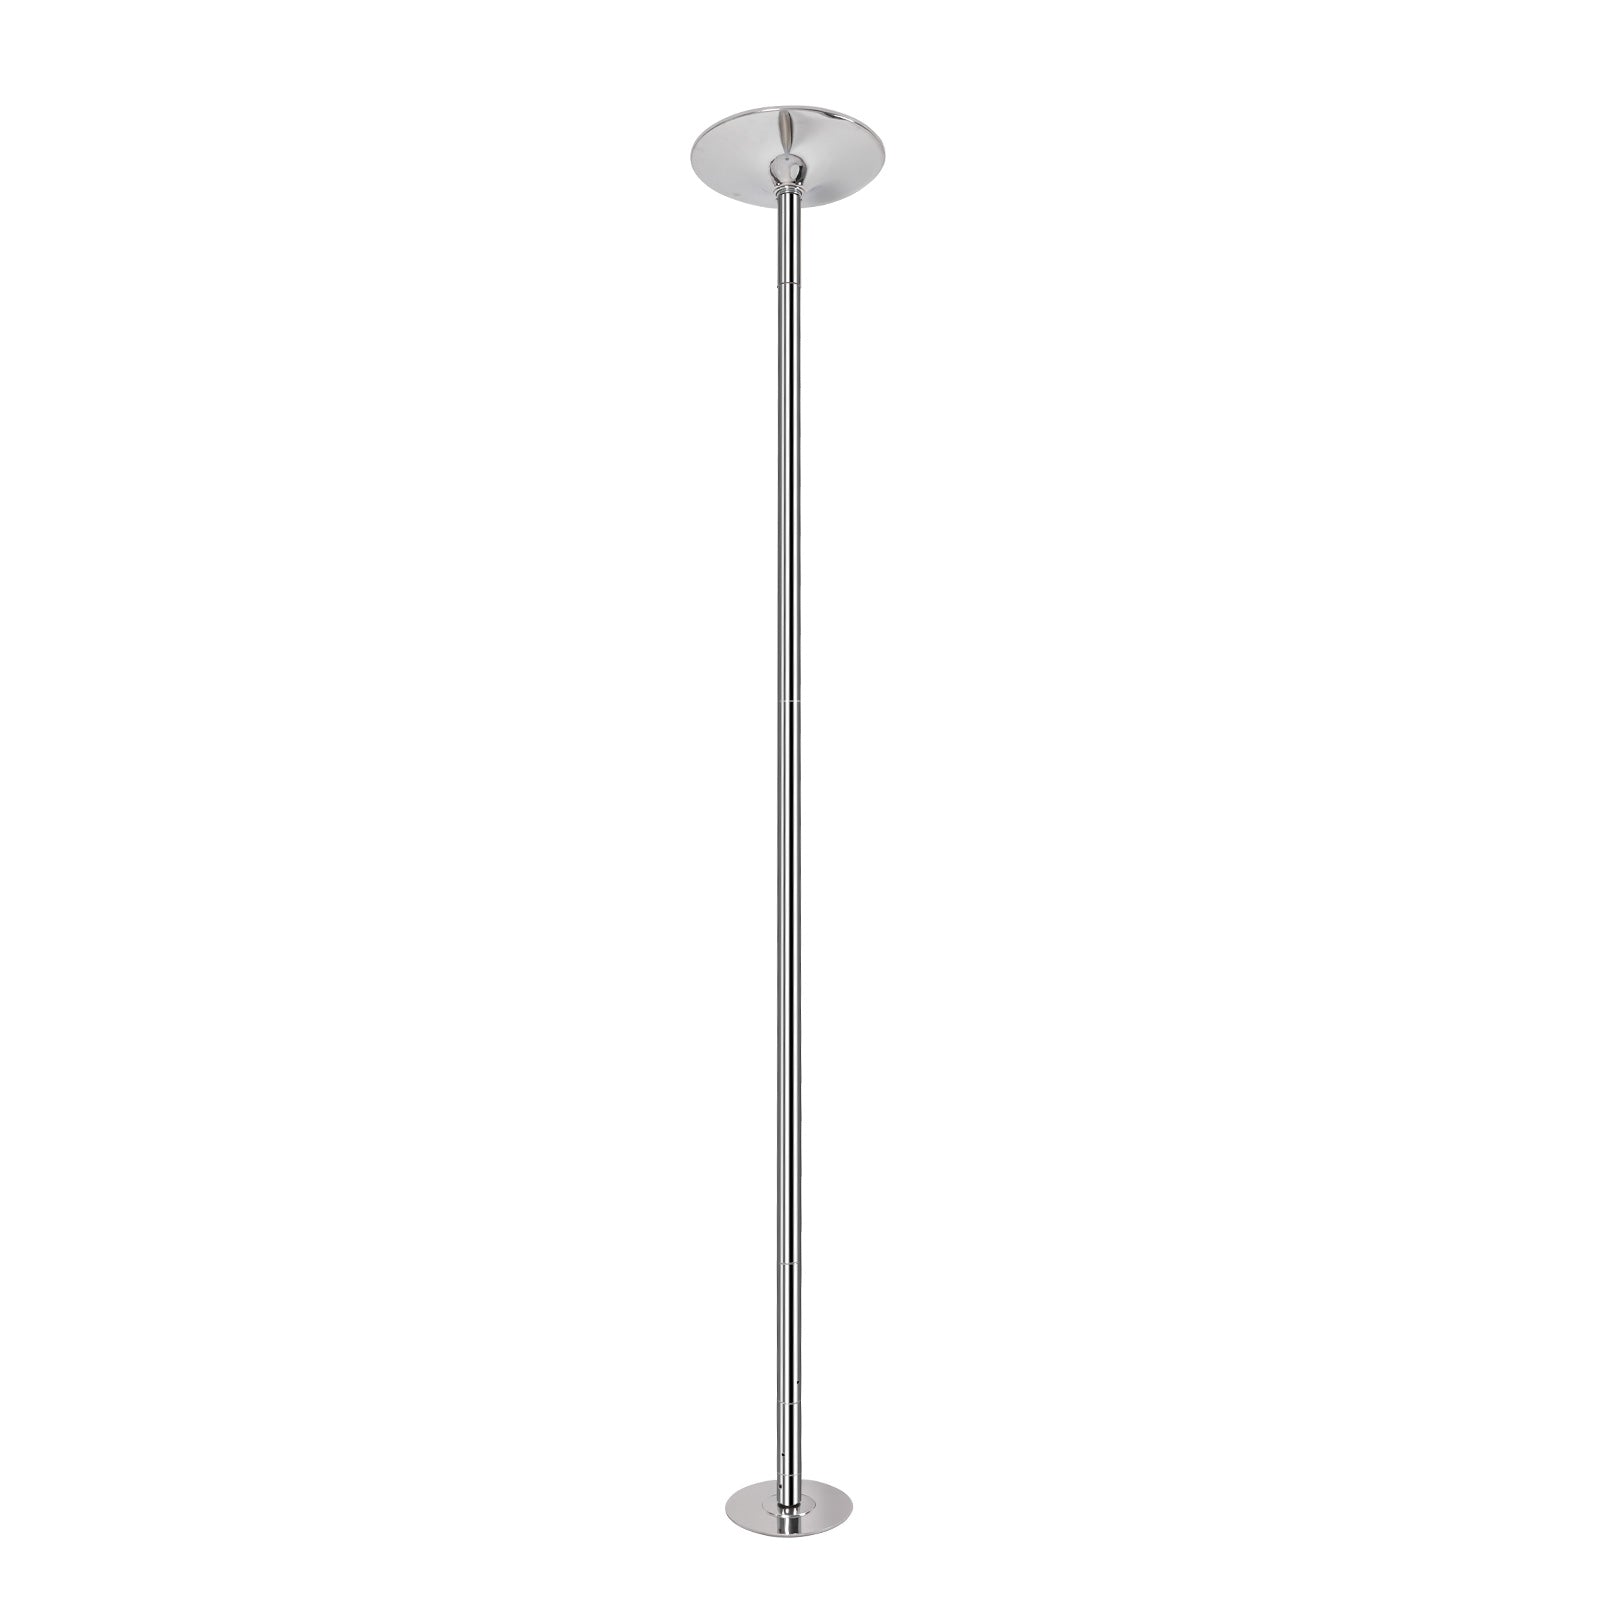 Pole Dance Pole, Stripper Pole Extension Pole 1.77 Inch Pole Dance Pole 7.33FT-9FT Height Adjustable Easy to Install, Smooth Connection